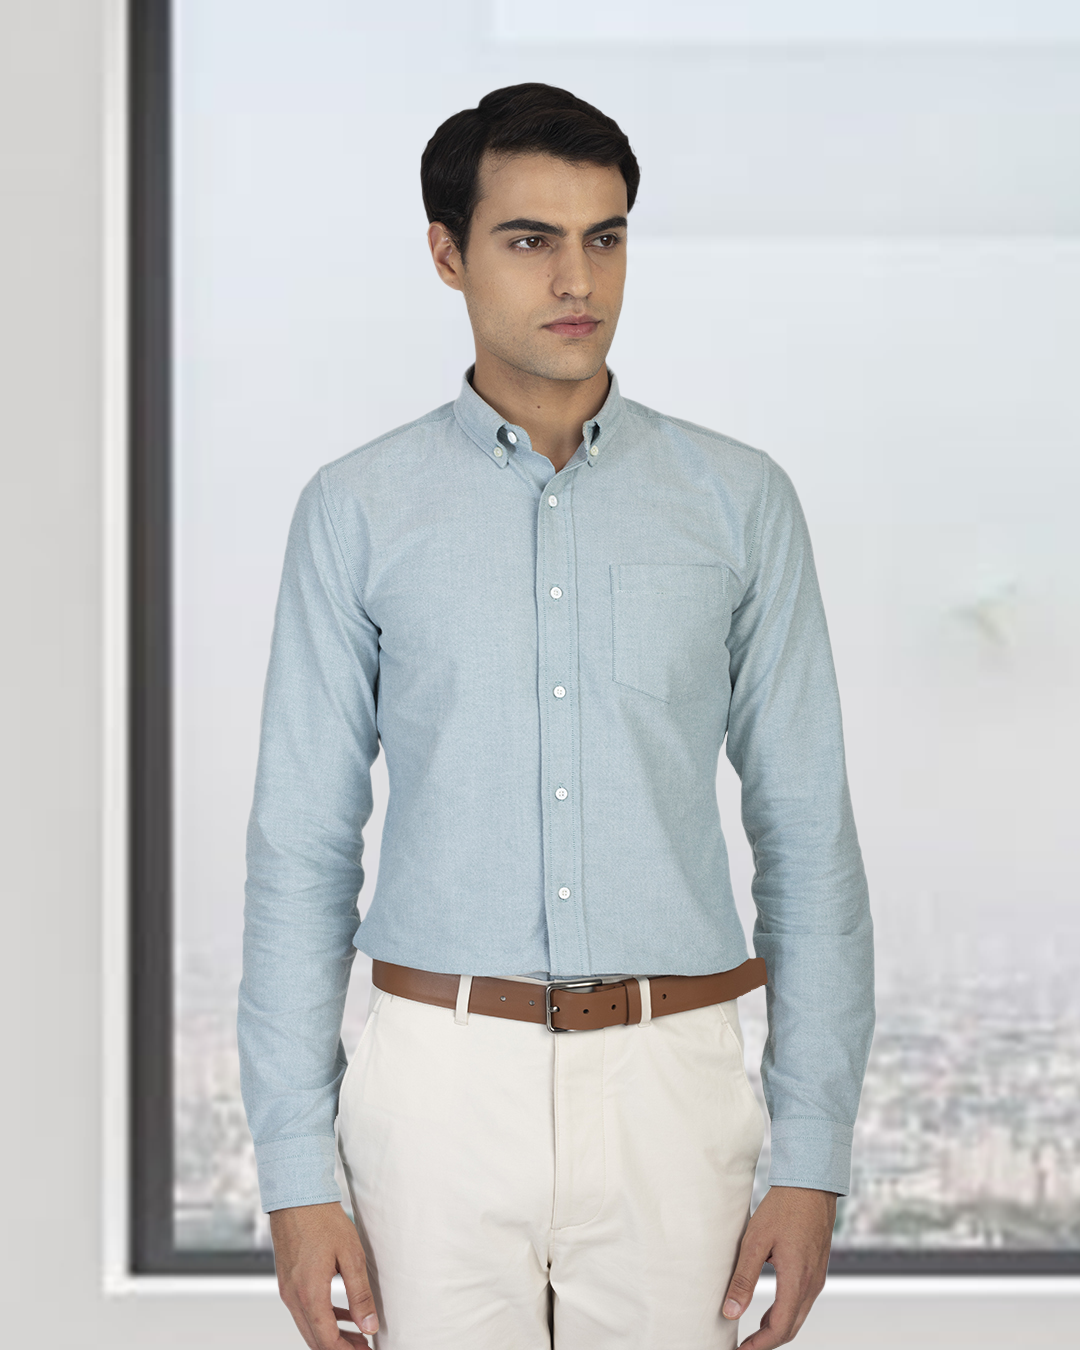 Front close up of model wearing the custom oxford shirt for men by Luxire in mint green